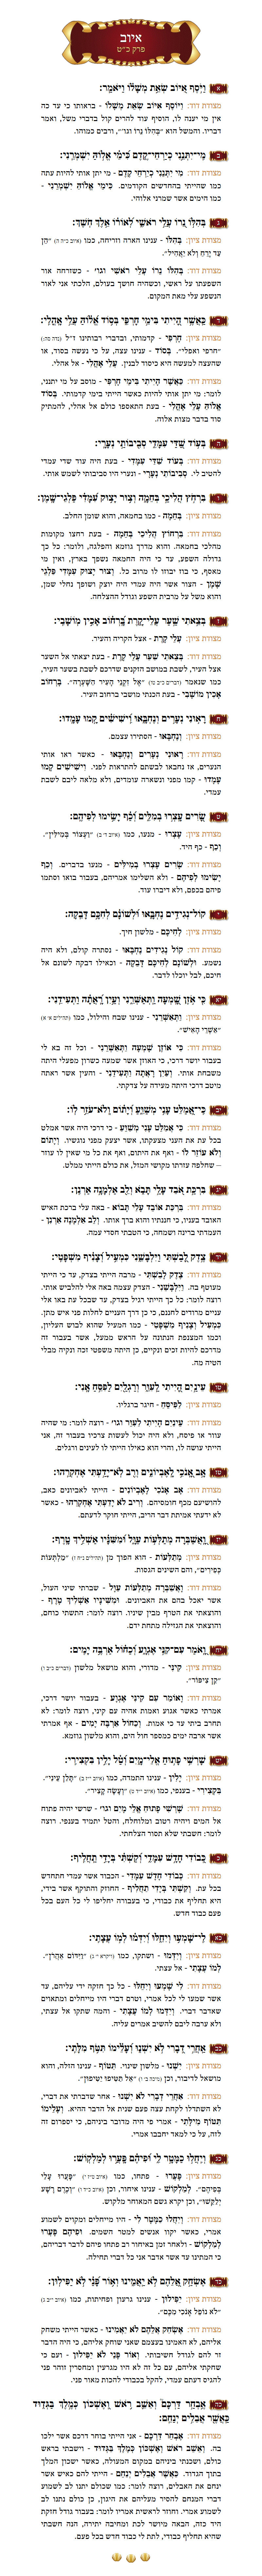 Sefer Iyov Chapter 29 with commentary